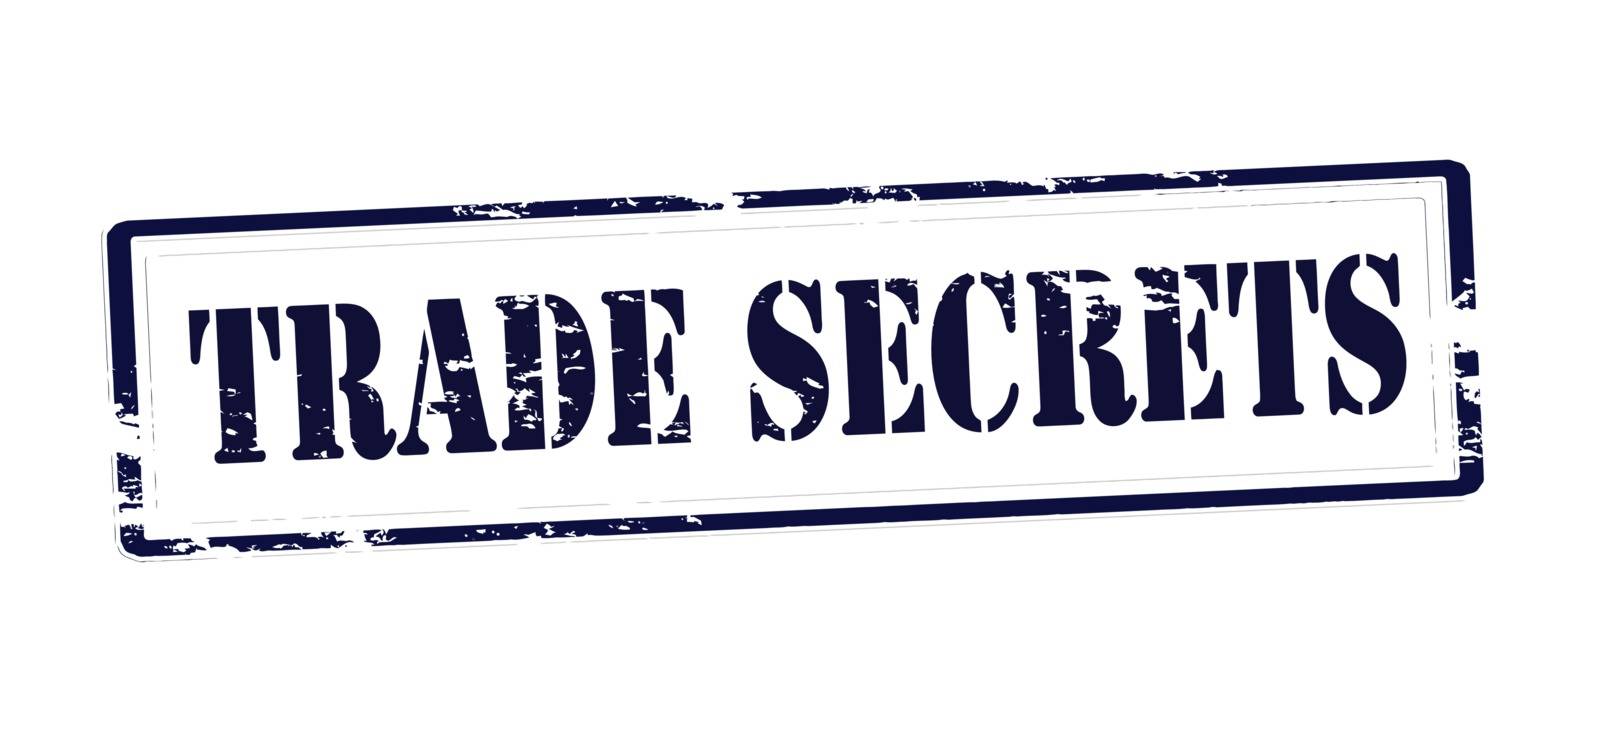 Stamp with text trade secrets inside, vector illustration